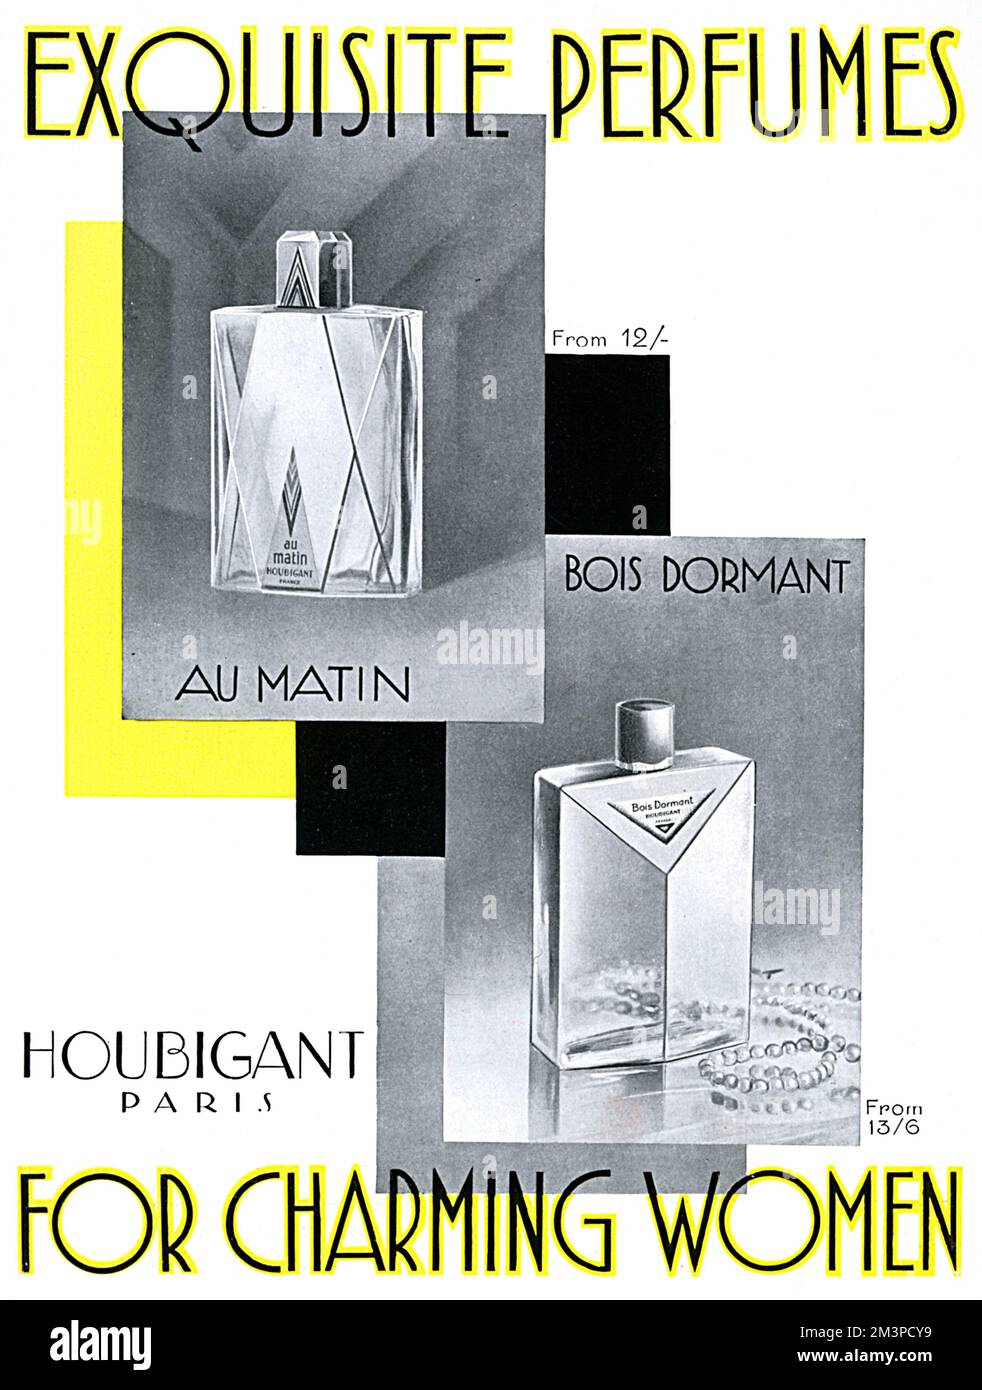 Advertisement for two 'exquisite perfumes' by Houbignant of Paris - Au Matin and Bois Dormant, for 'charming women' in 1929.     Date: 1929 Stock Photo